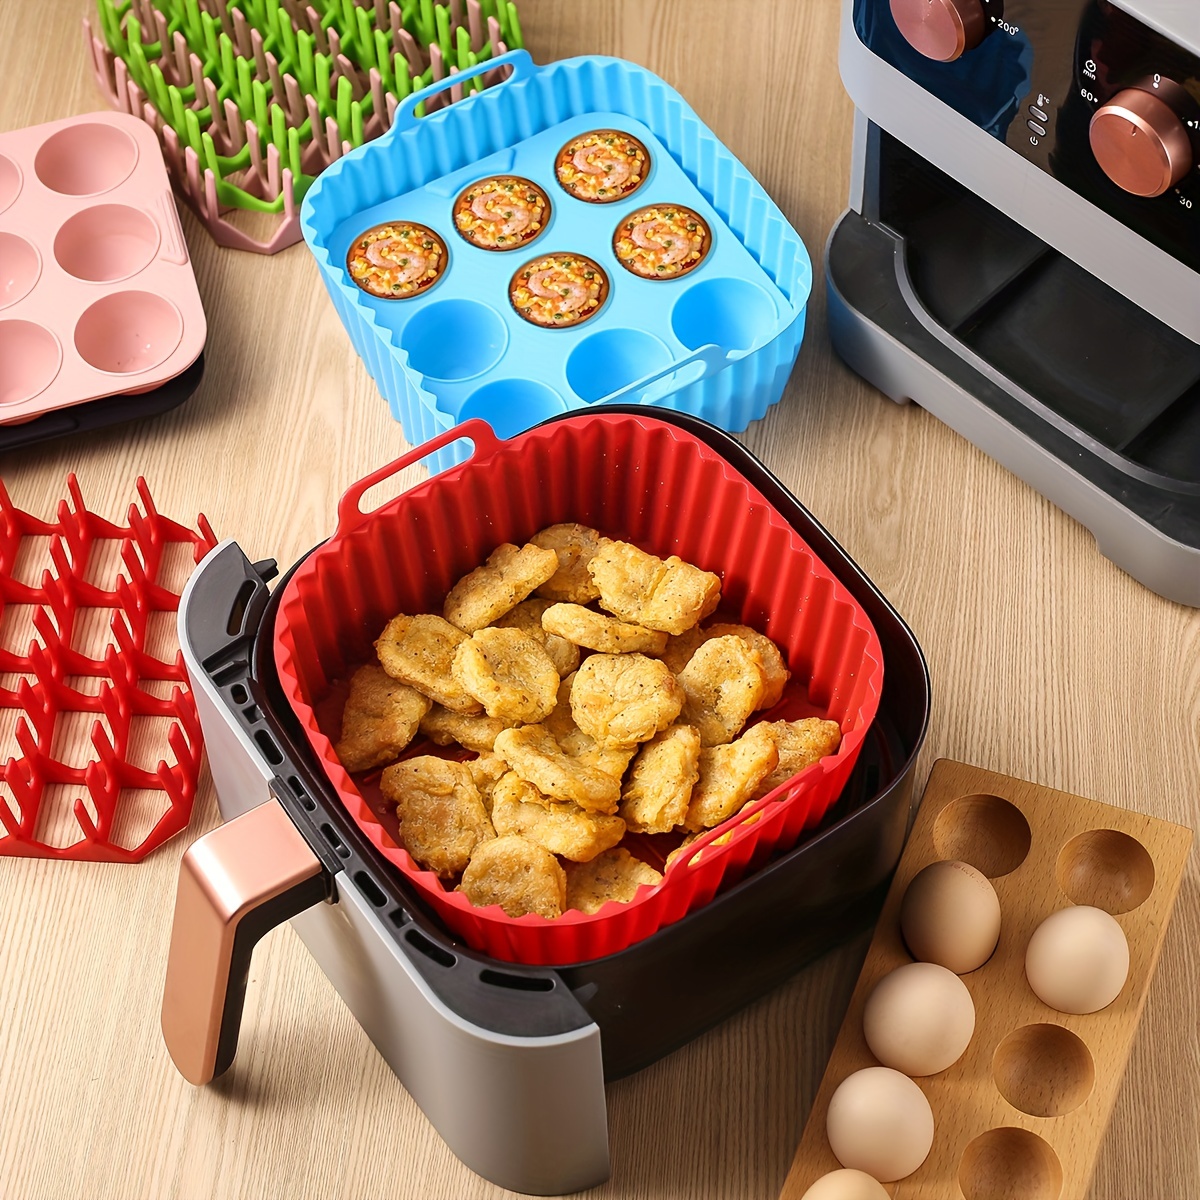 Rectangle Airfryer Silicone Basket Silicone Mold For Air Fryer